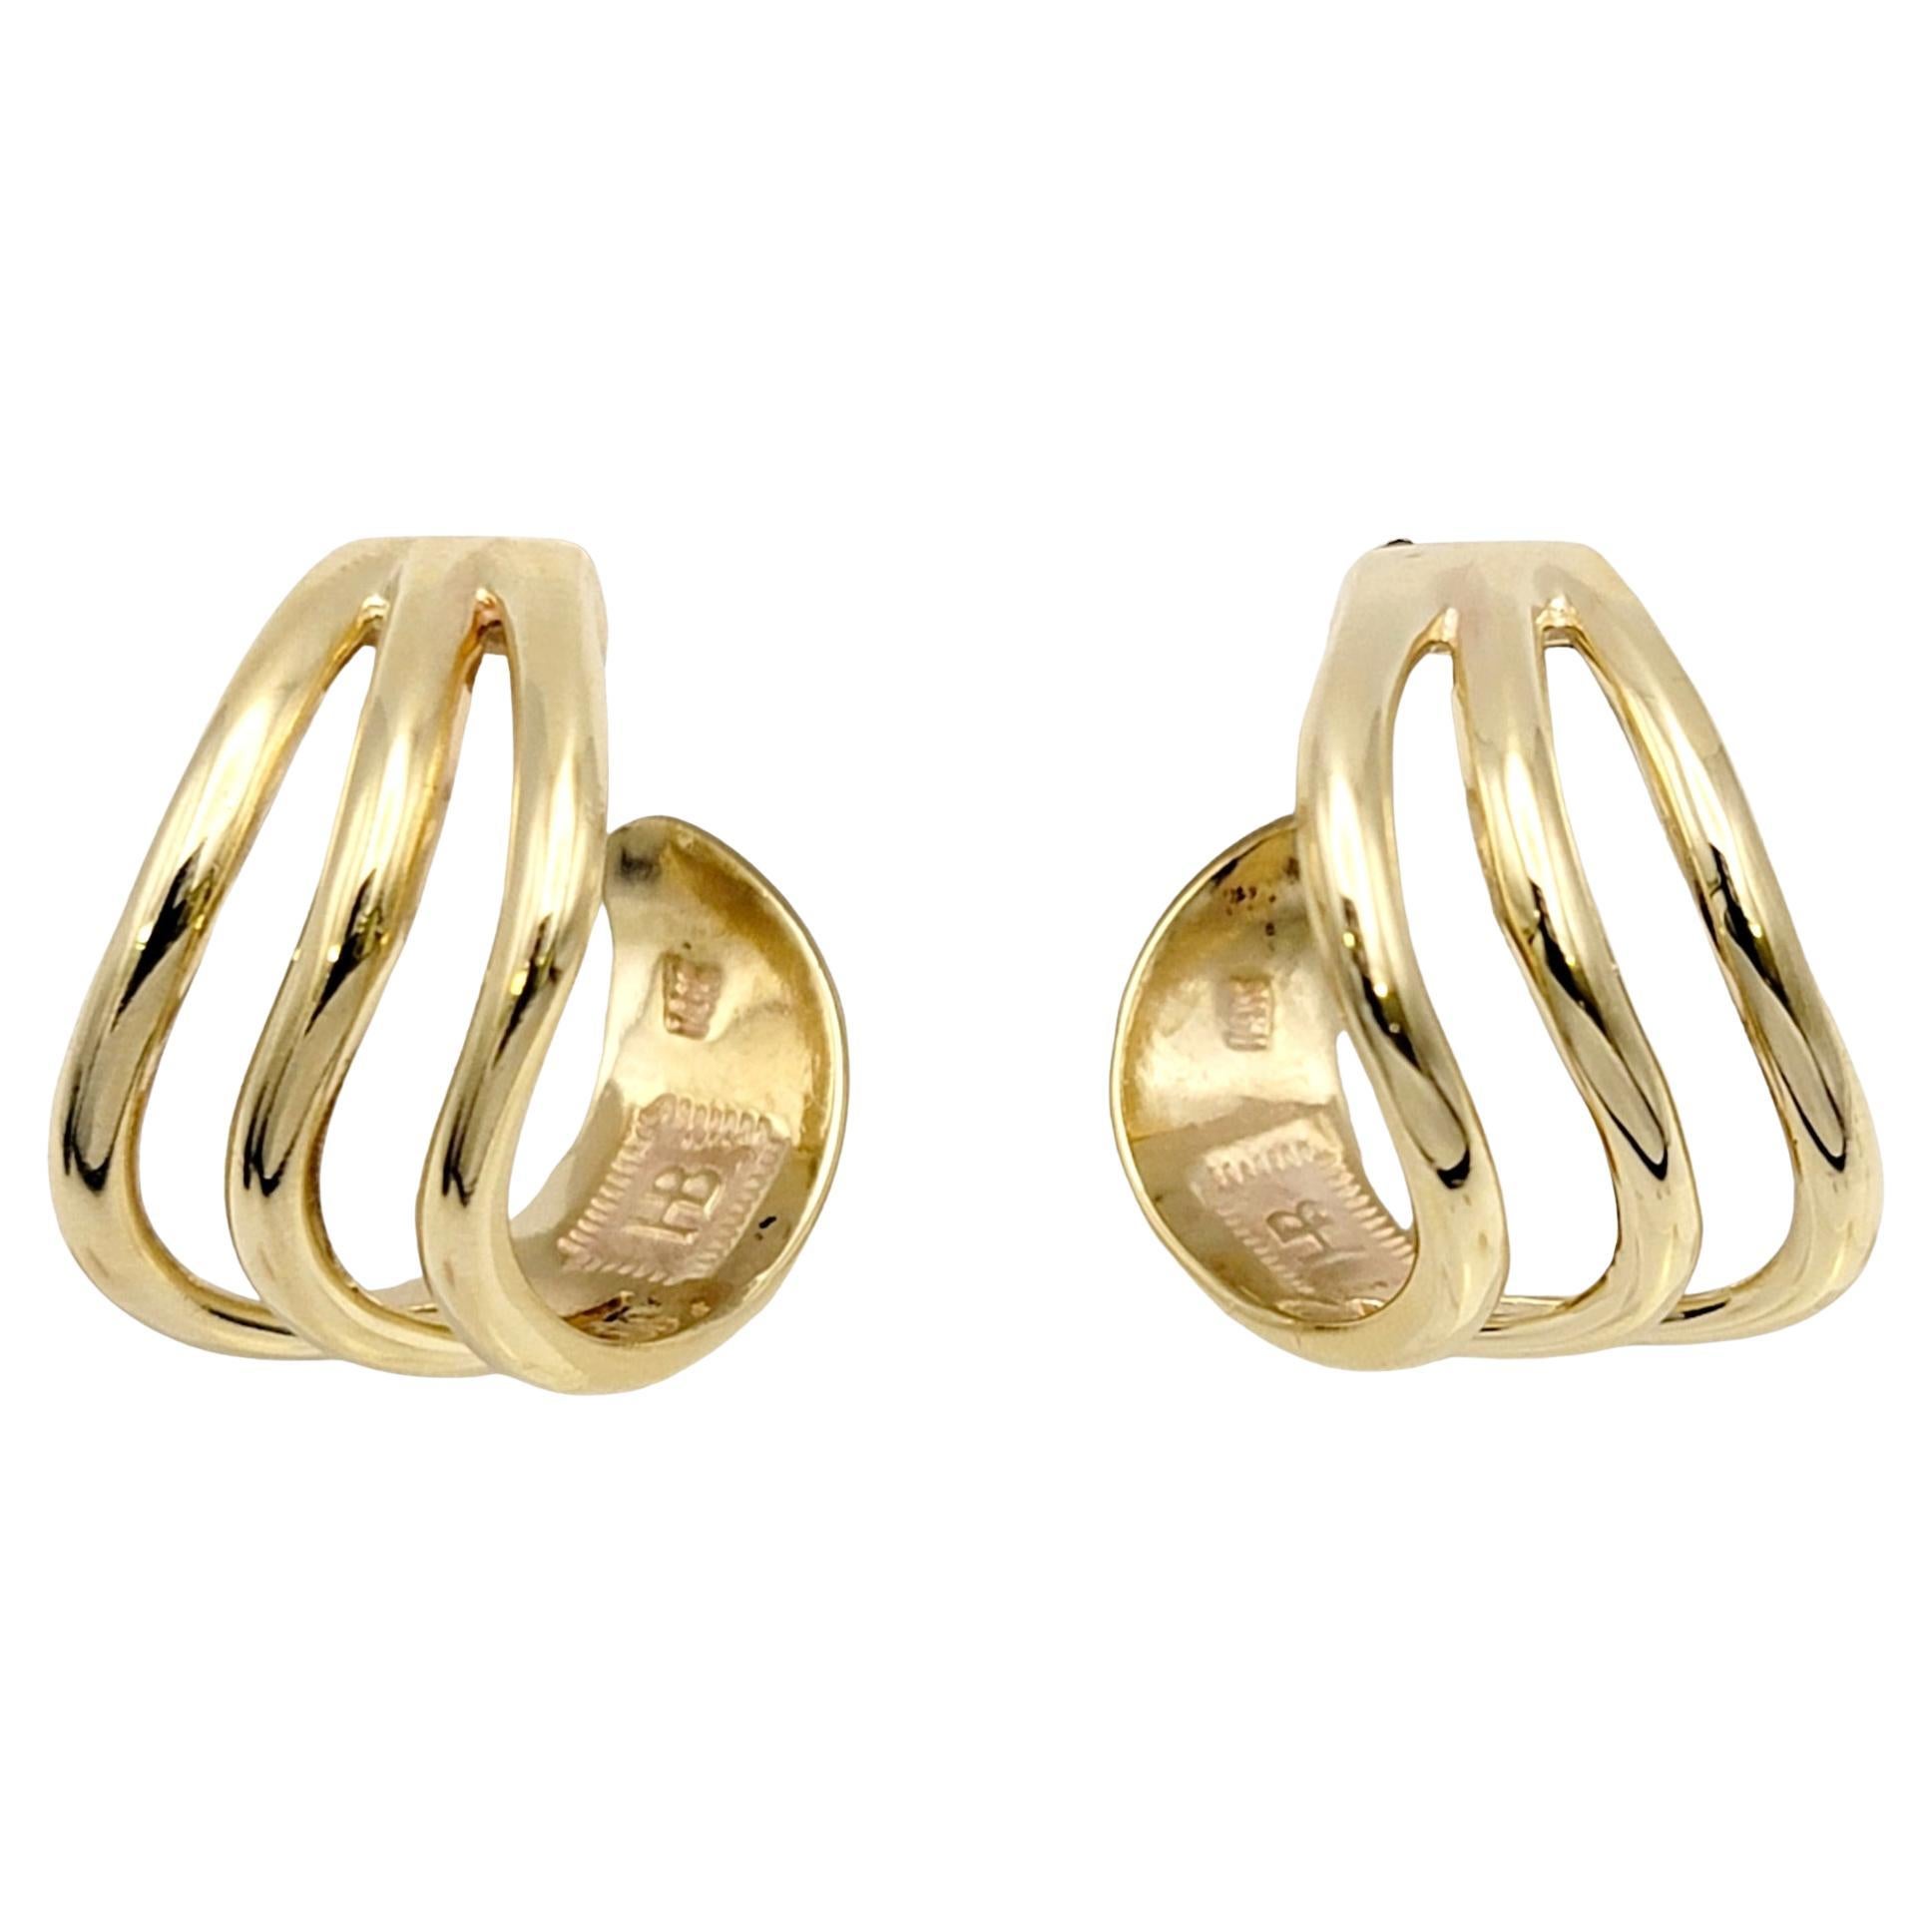 Simple yet stunning 14 karat yellow gold hoop earrings by Harvey Begay. These unique contoured hoops give off a stylish, modern vibe while gently hugging the lobe. You will adore these earrings! 

The sleek hoop style earrings features a triple